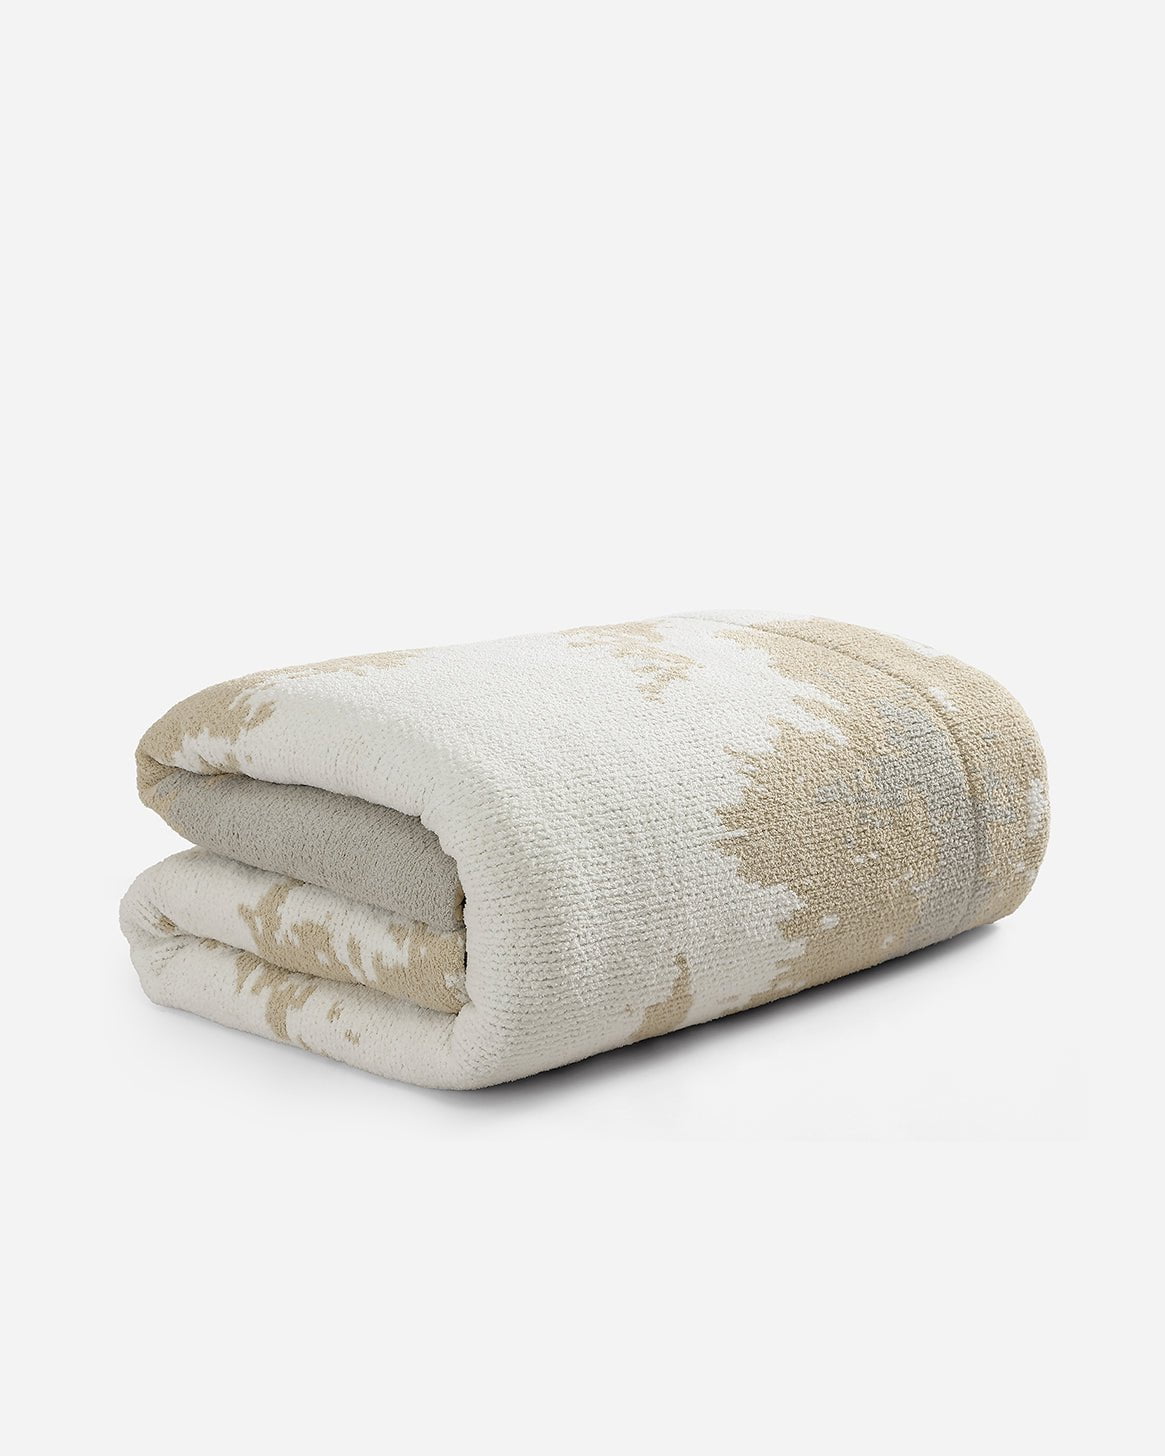 A folded Double Snug Pixel Comforter by Sunday Citizen, featuring a beige and white pattern on a white background. The snug fabric gives it a textured, plush appearance with a subtle abstract design. This all-in-one comforter is crafted with recycled plastic filling for added eco-friendly warmth and comfort.